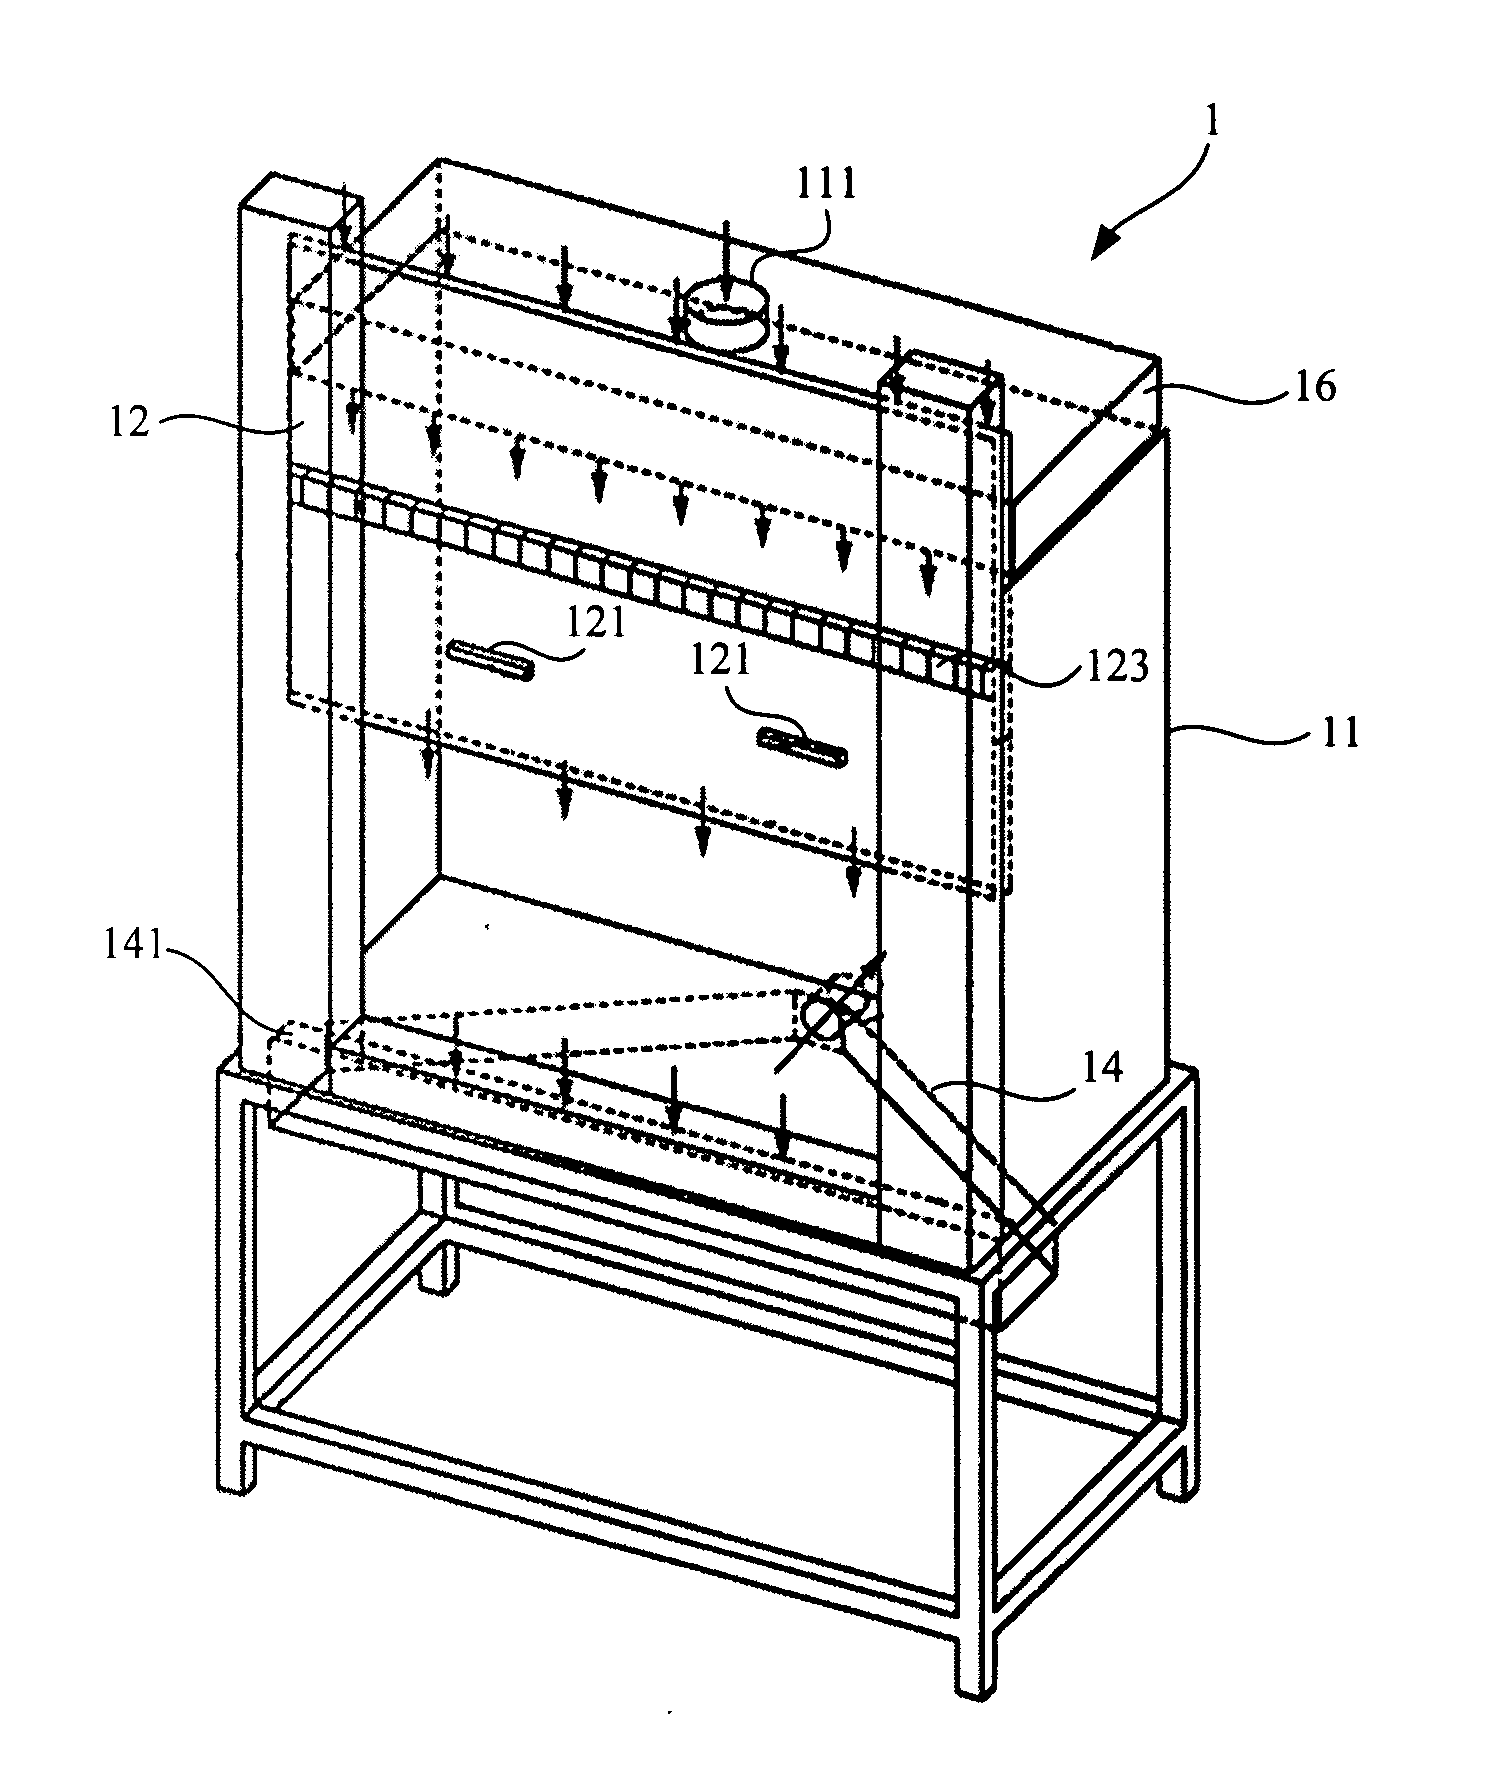 Air curtain-isolated biosafety cabinet